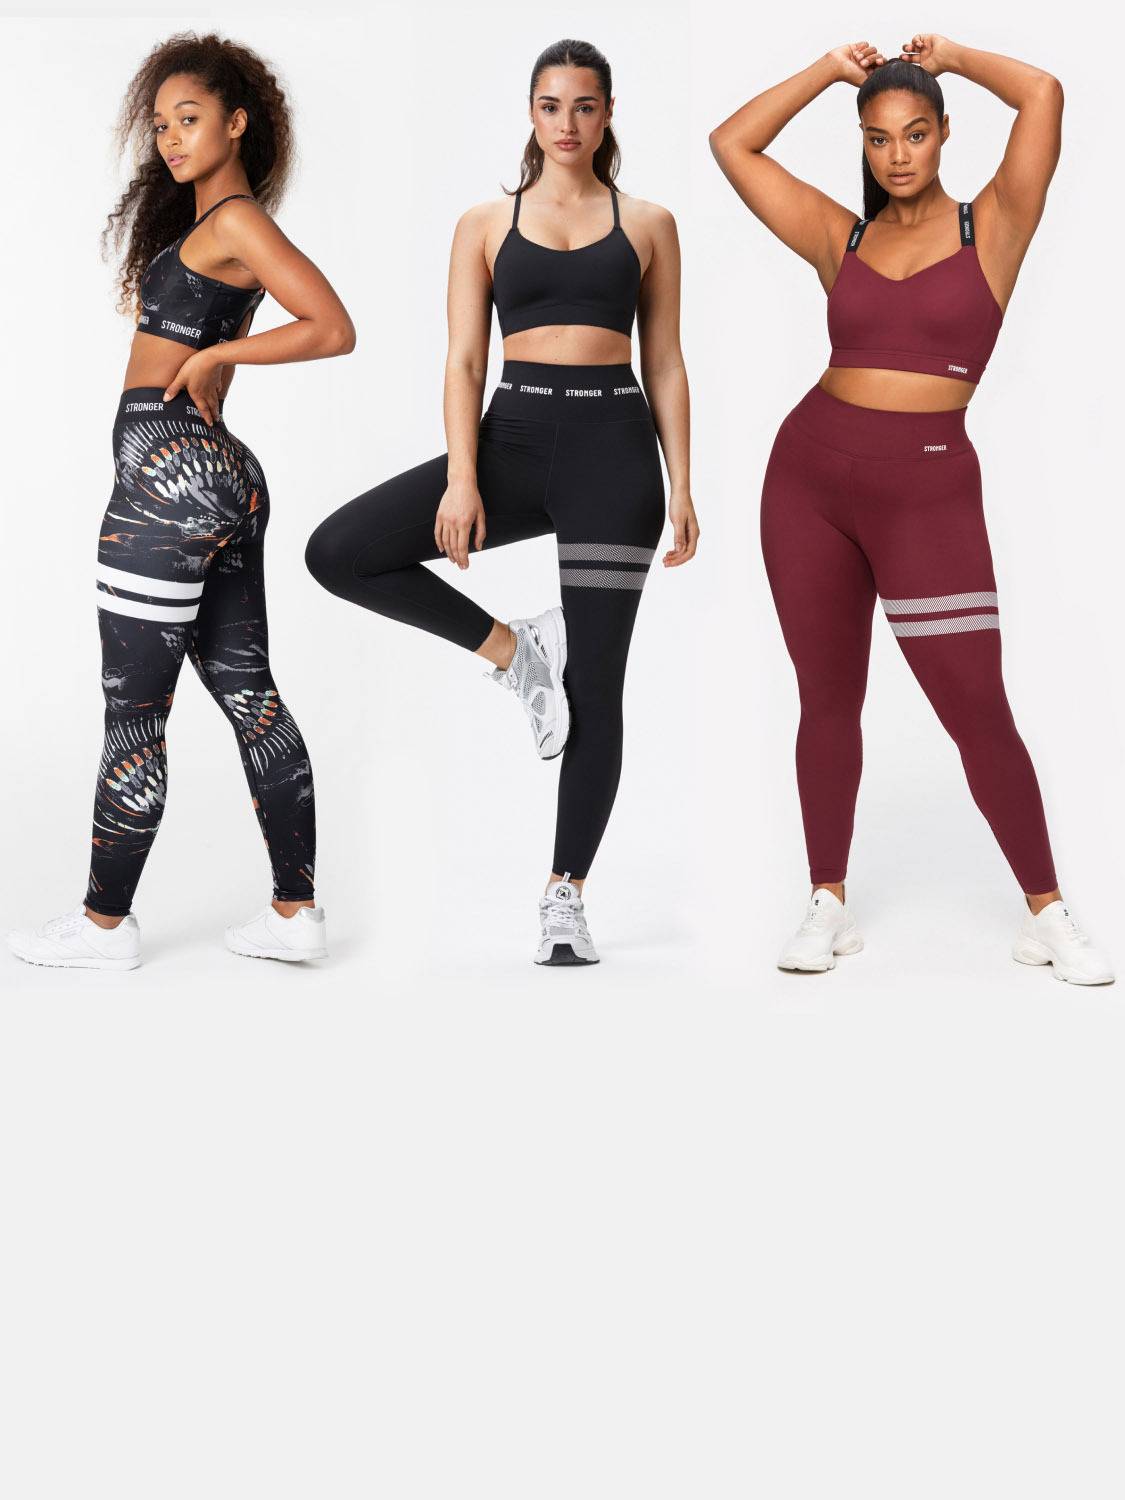 ♡ Womens Yoga Clothes, Workout Clothes